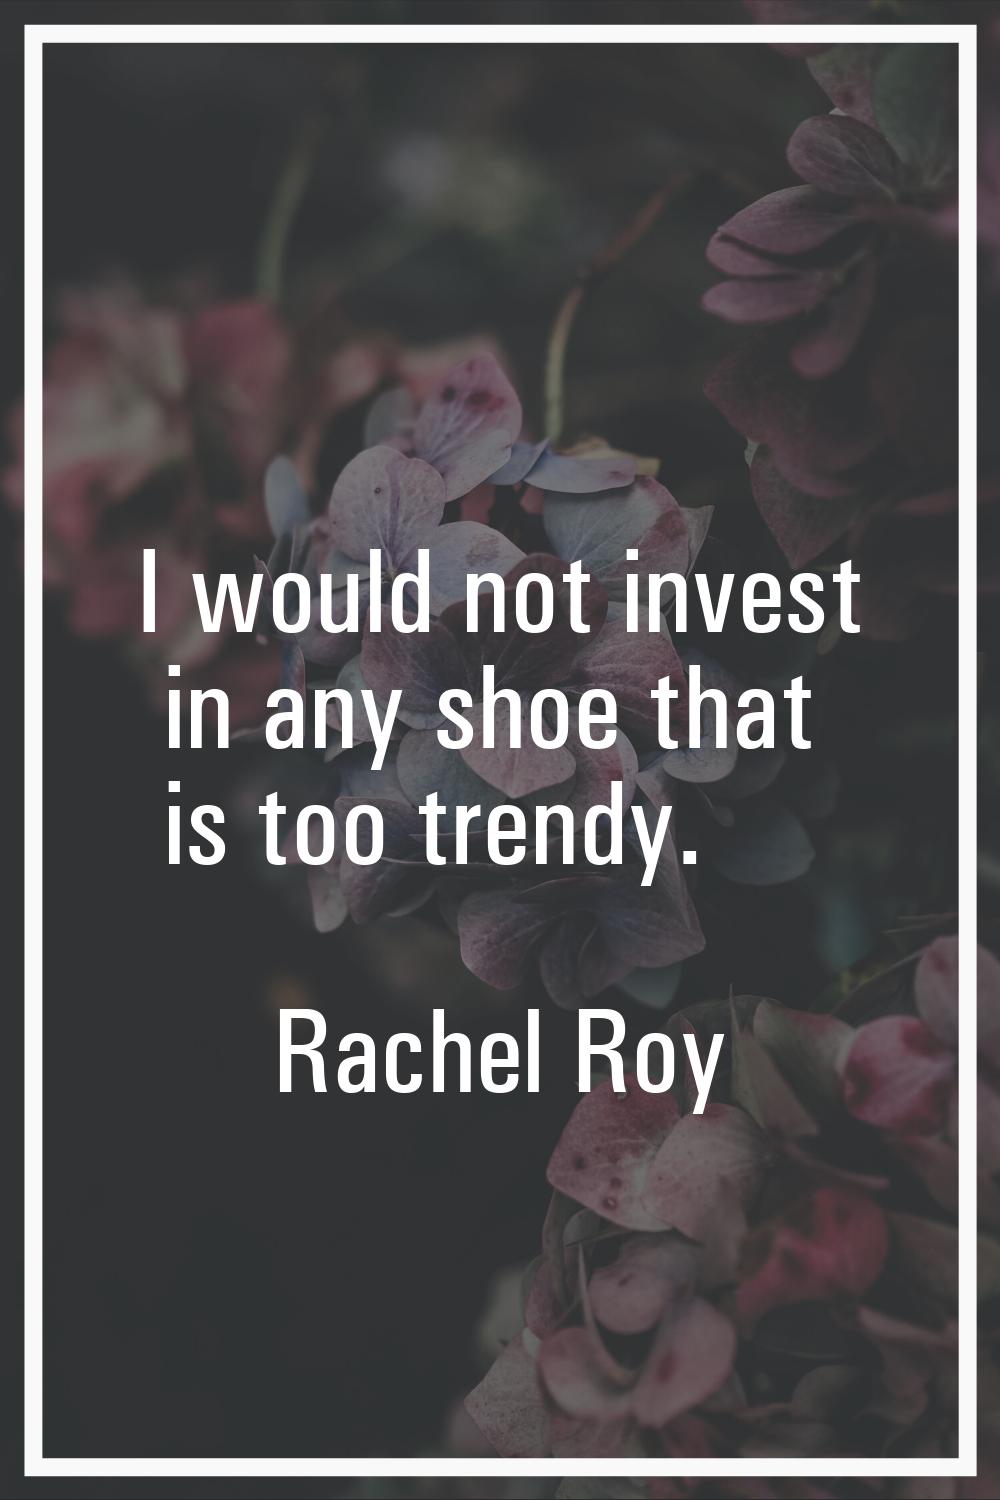 I would not invest in any shoe that is too trendy.